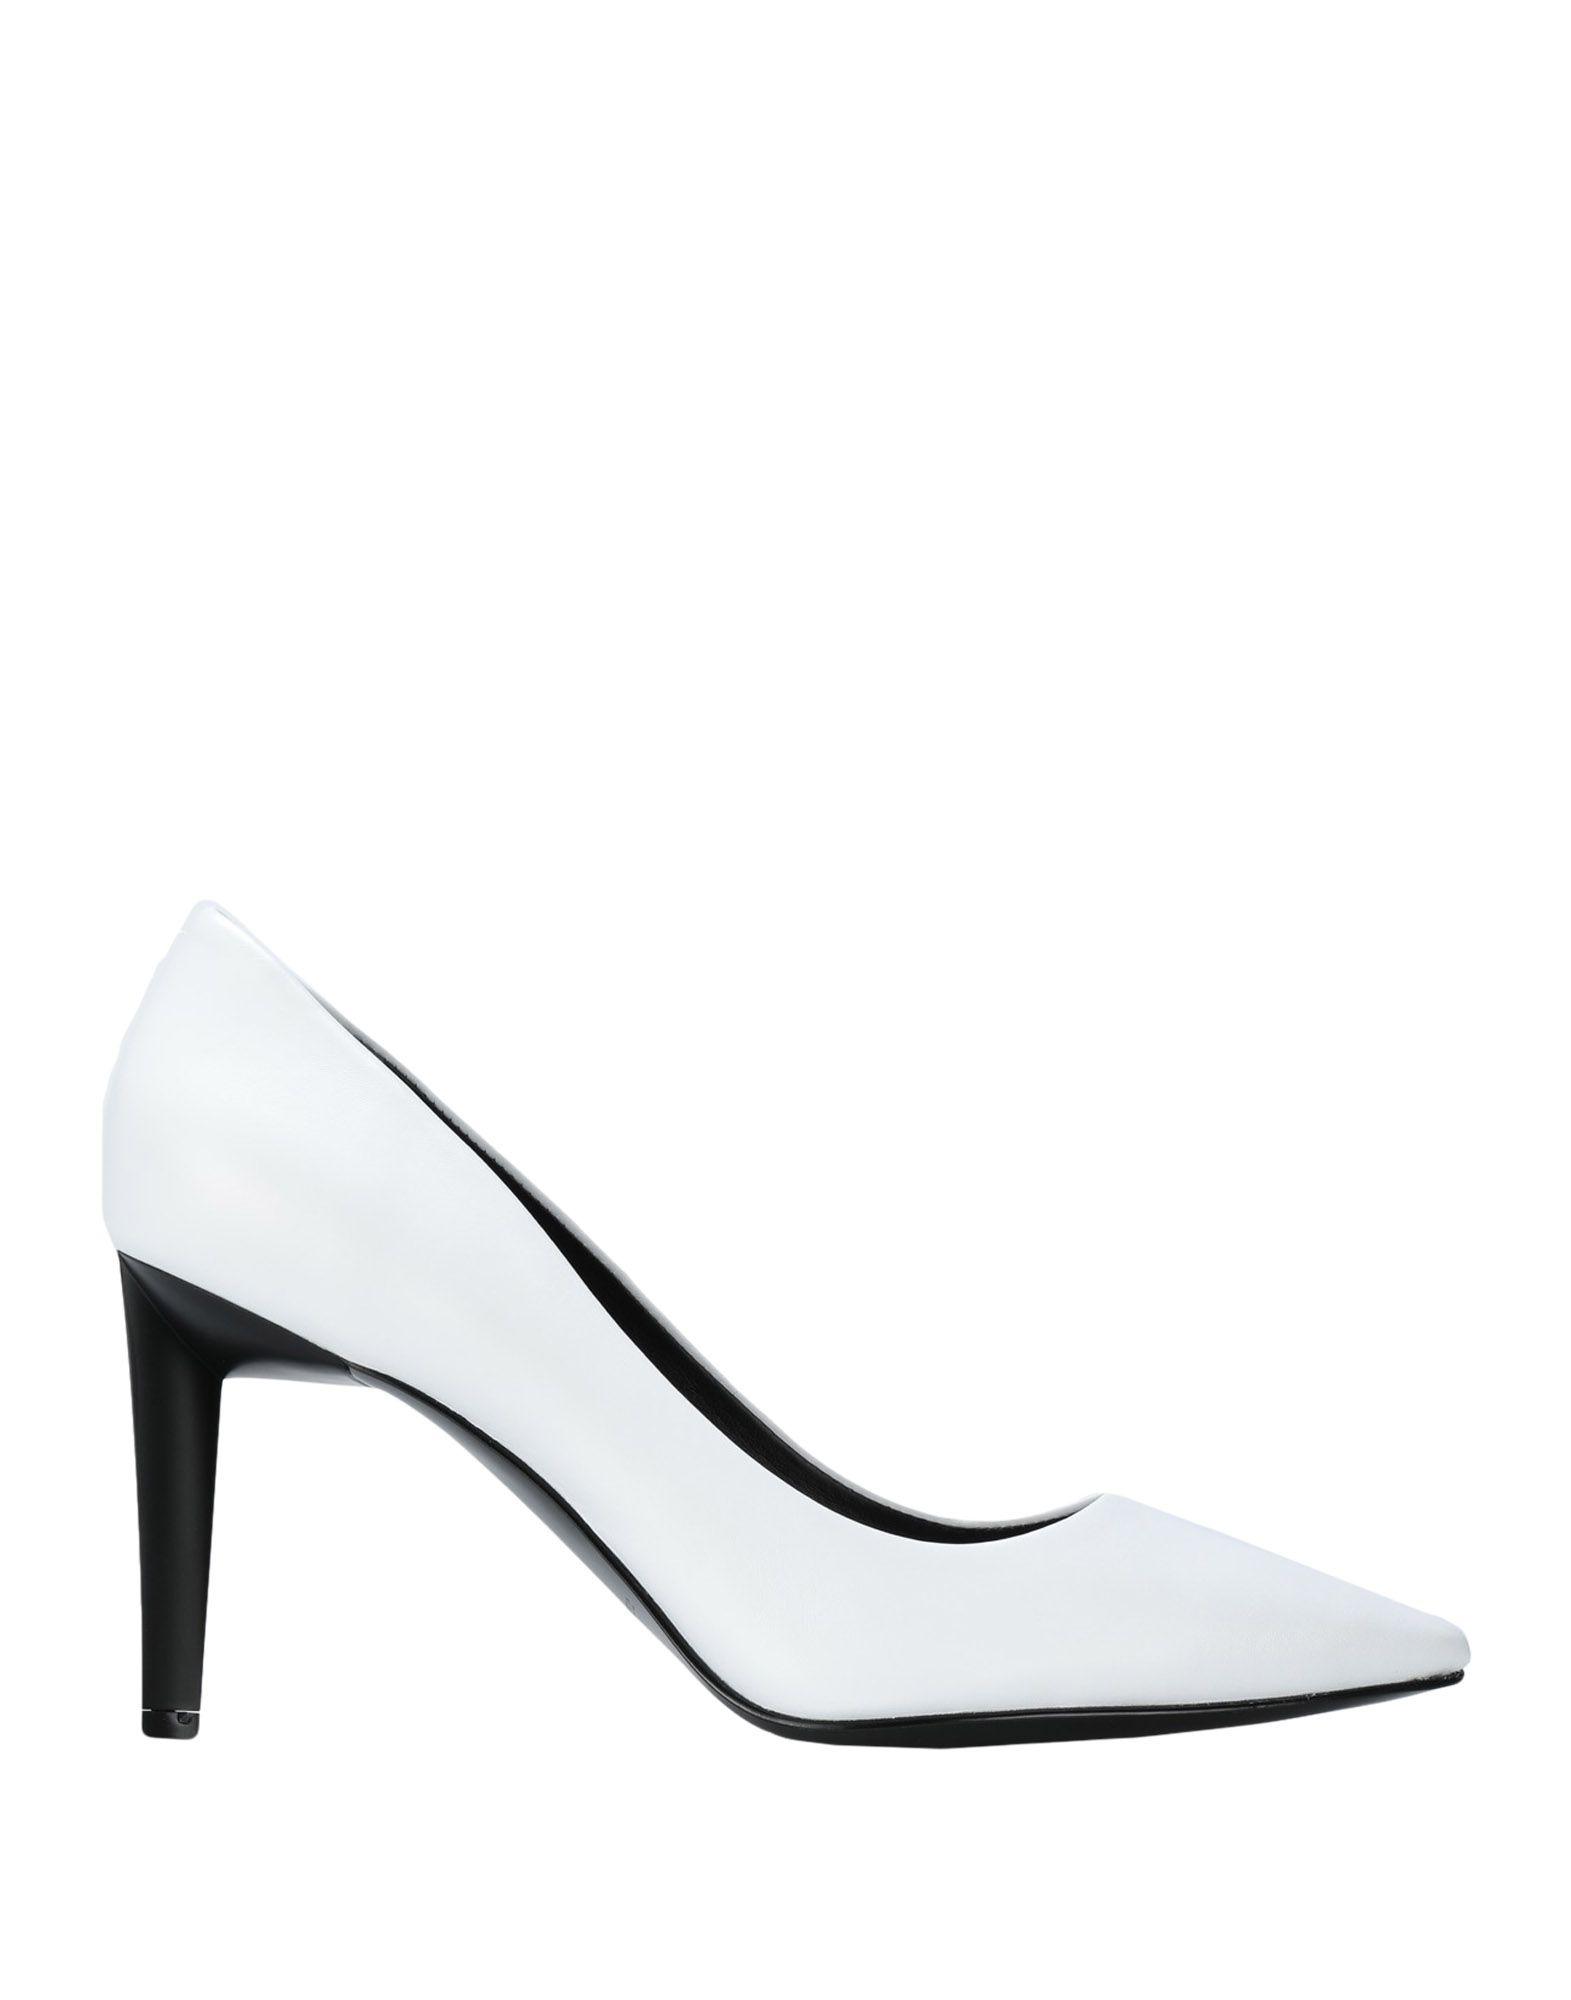 Kendall + Kylie Leather Structured Heel Pumps in White - Save 39% - Lyst